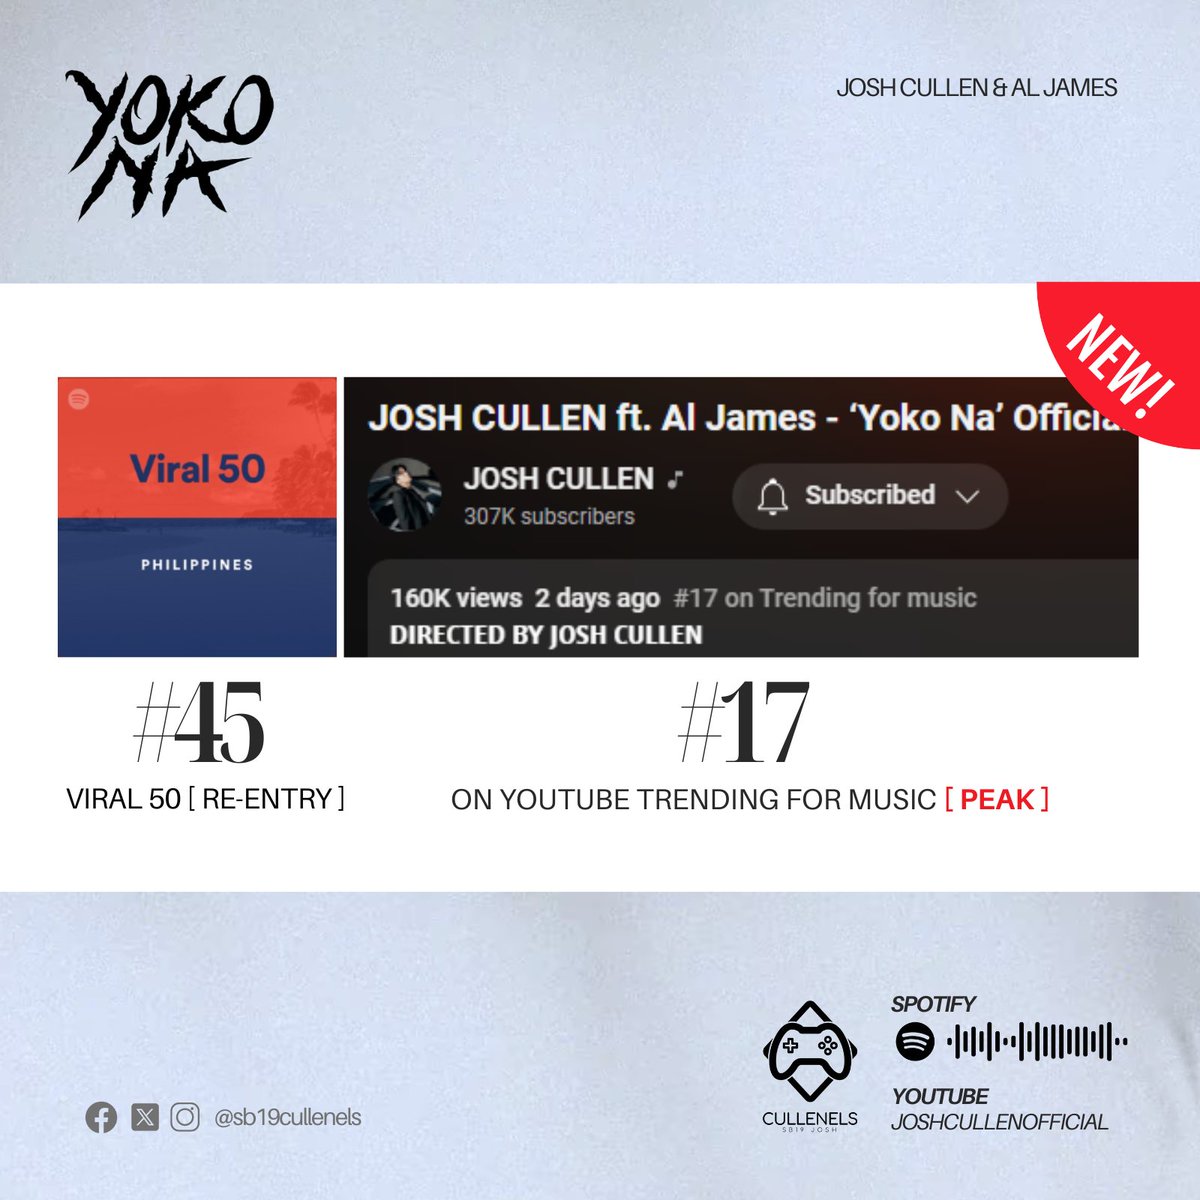 [JOSH CULLEN] Certified 🔥 as #YokoNa re-enters Spotify's Viral 50 with the release of the official MV which is currently #17 on the Trending for Music list. 🔗 youtu.be/q9-9wVu6uVE?si… 🔗open.spotify.com/playlist/37i9d… Let's keep this momentum going! #JOSHCULLEN @JoshCullen_s